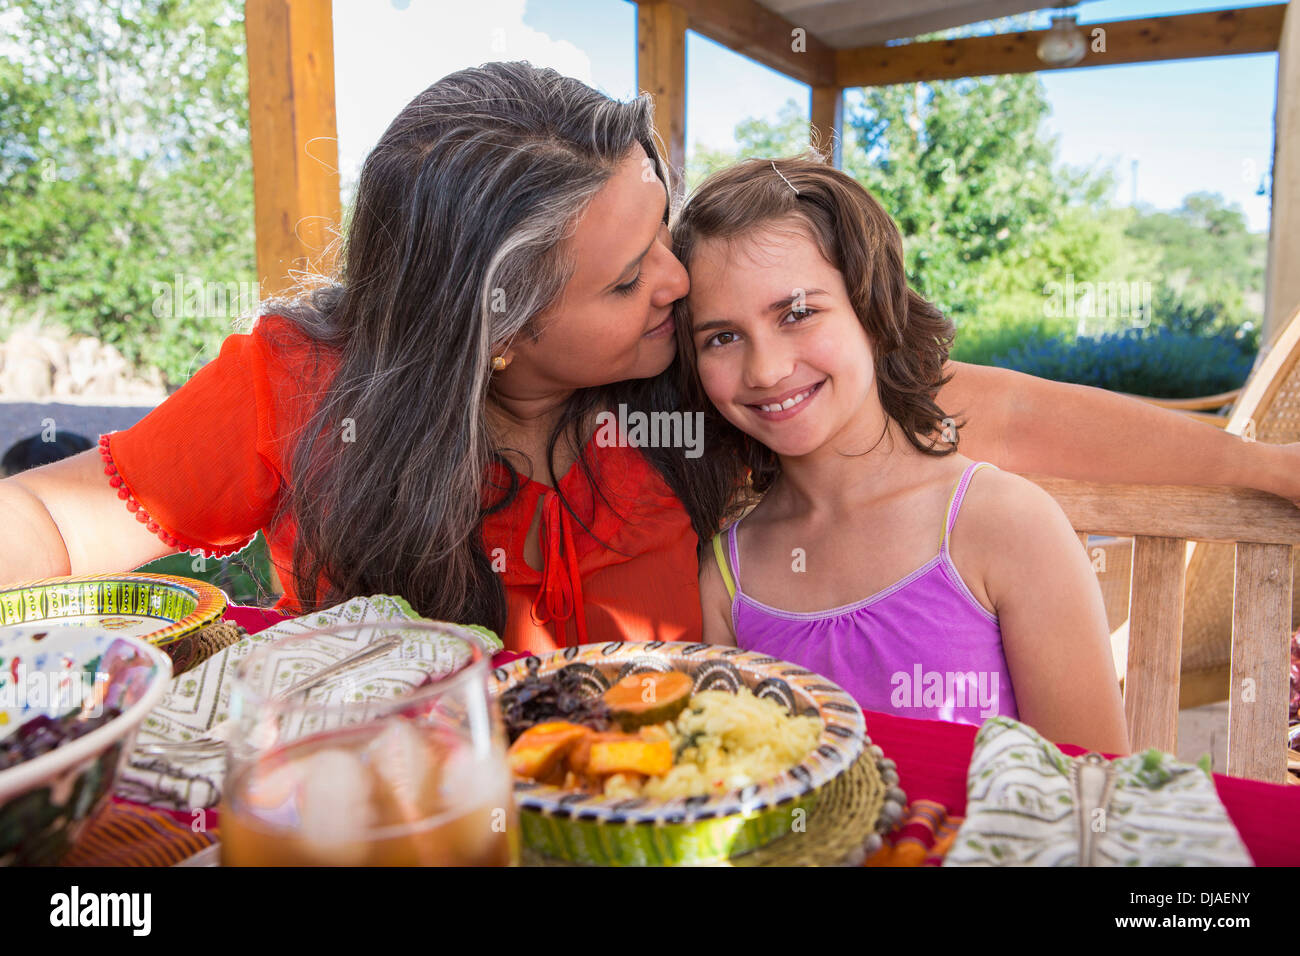 Mother and daughter eating at table Stock Photo